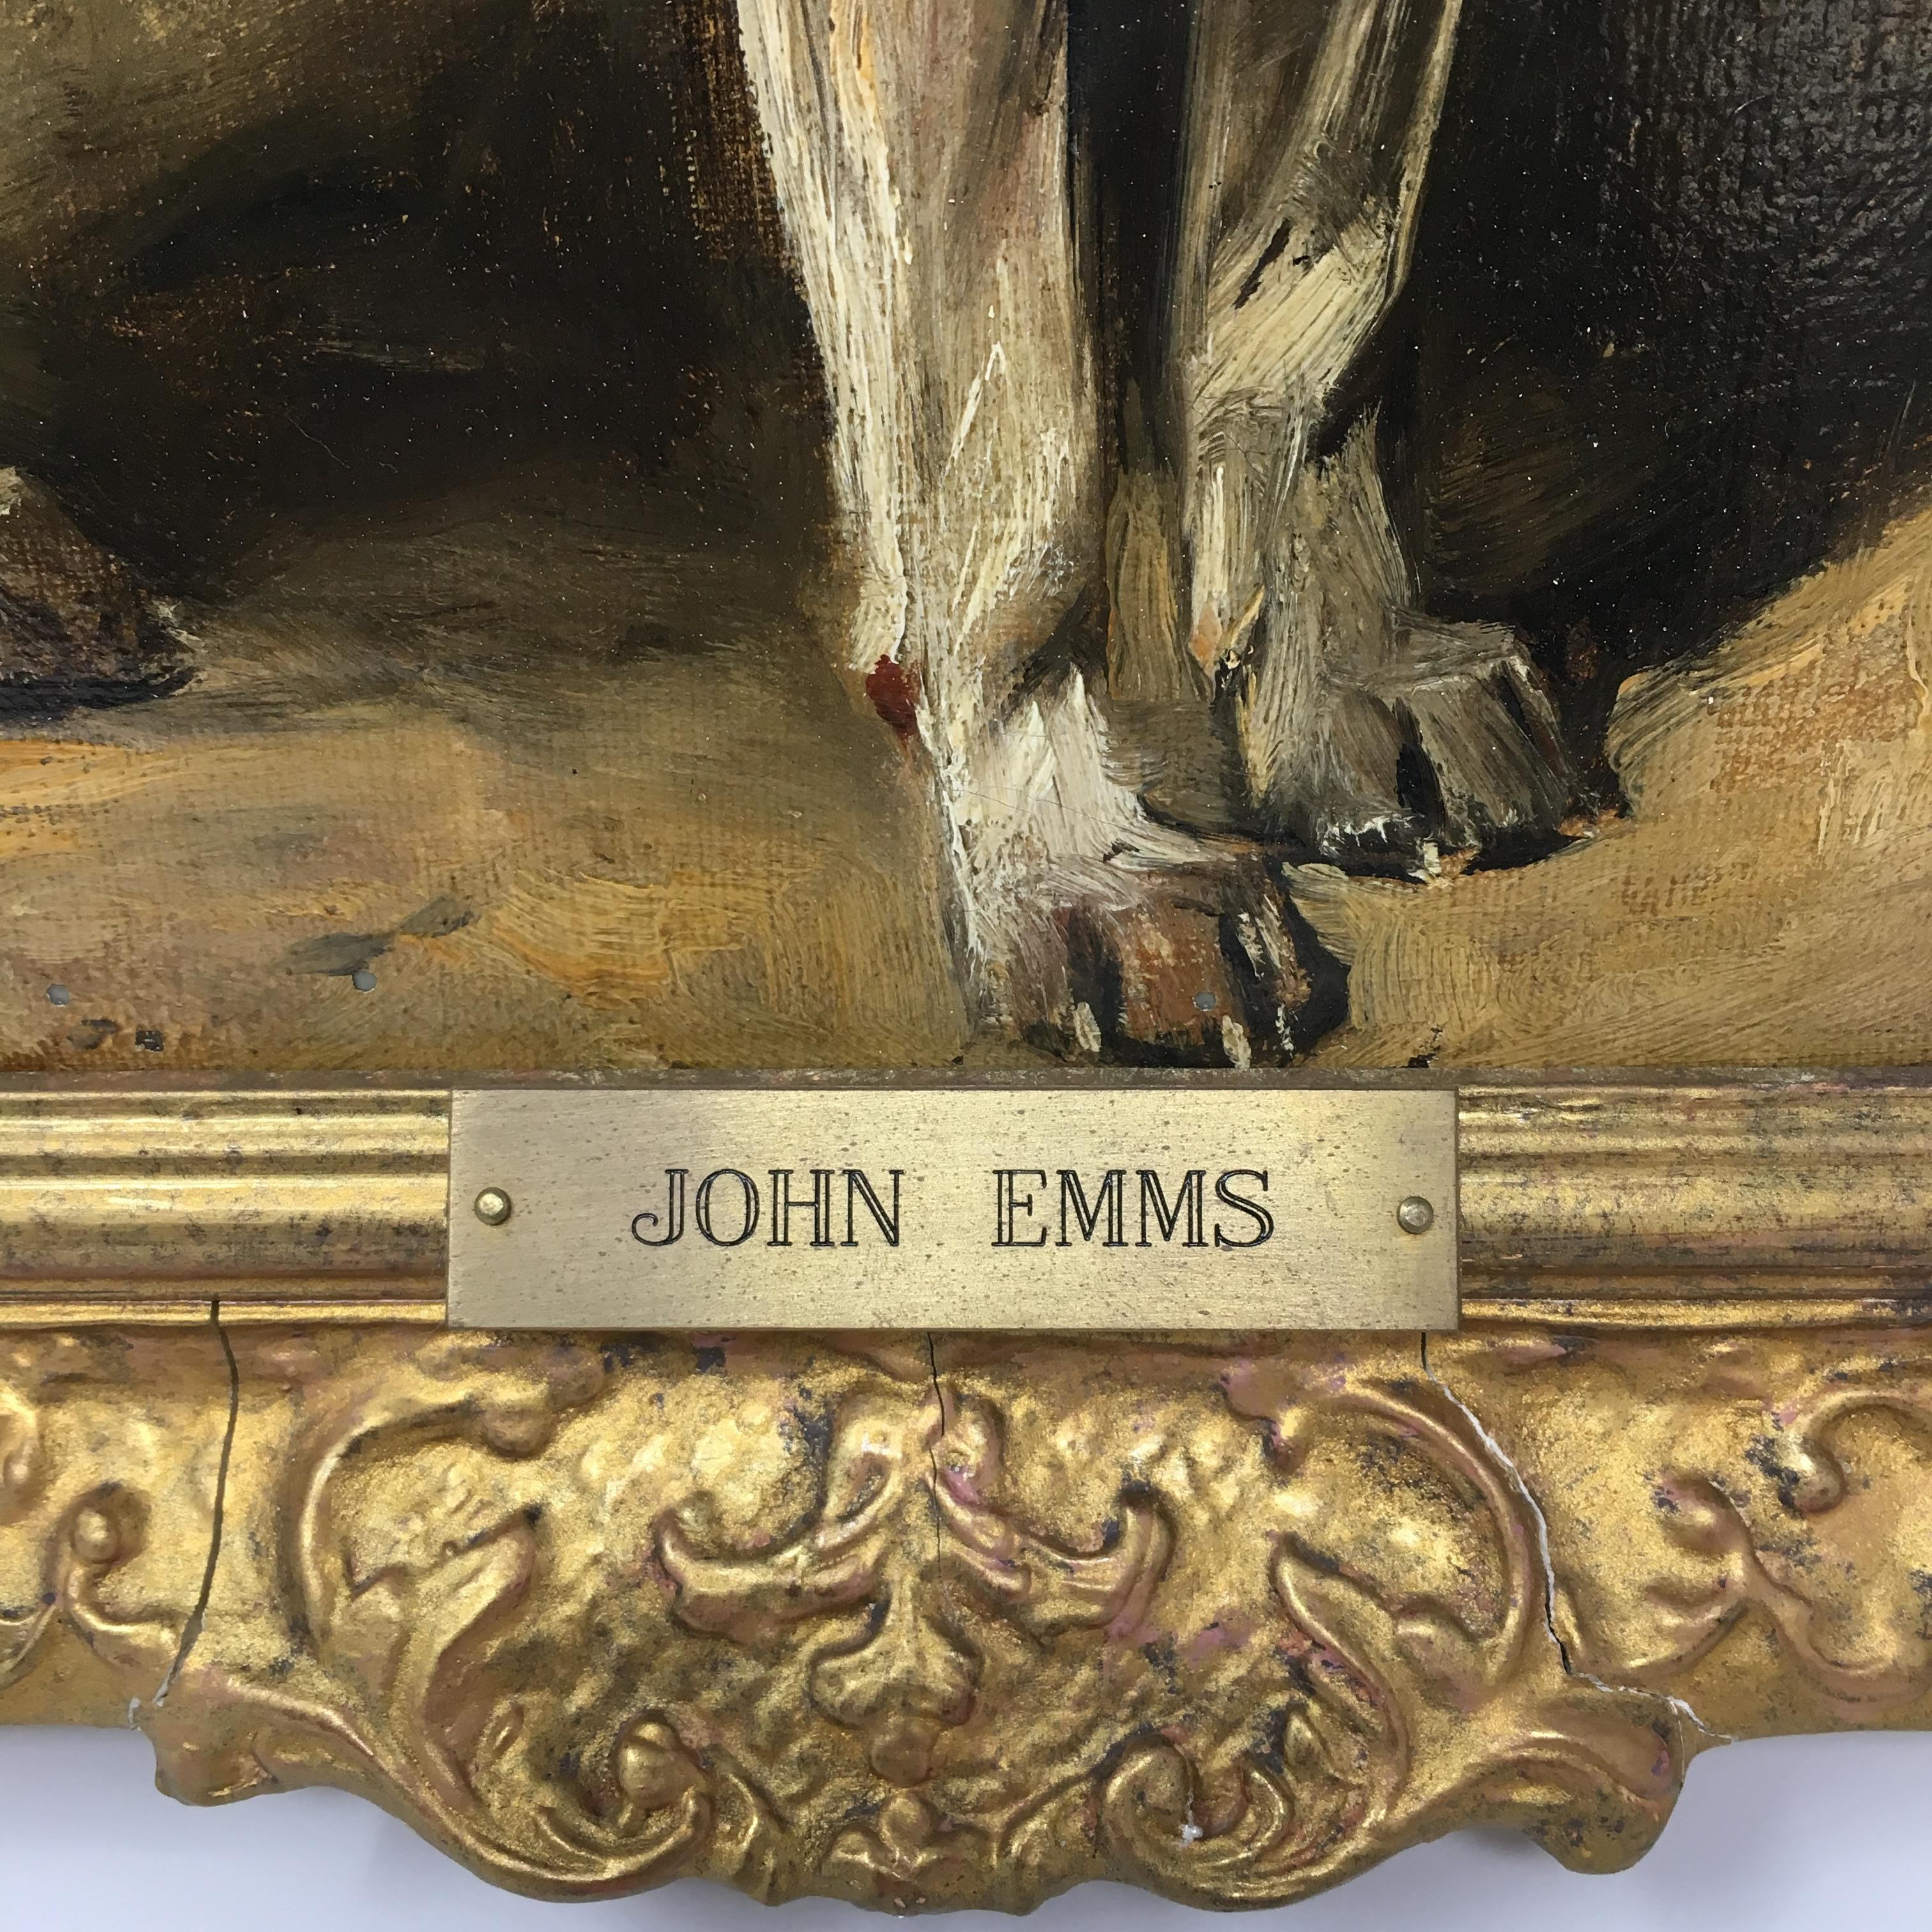 John Emms (Bristish, 1843 - 1912)
'Turk'  A Jack Russell Terrier
Signed lower right 'Jno Emms' and inscribed 'Turk'
'John Emms' inscribed on brass name plate
Oil on canvas
12in H x 15 1.2in L
In gilt frame: 171/2in H x 21in L x 2 1/2in
Provenance: